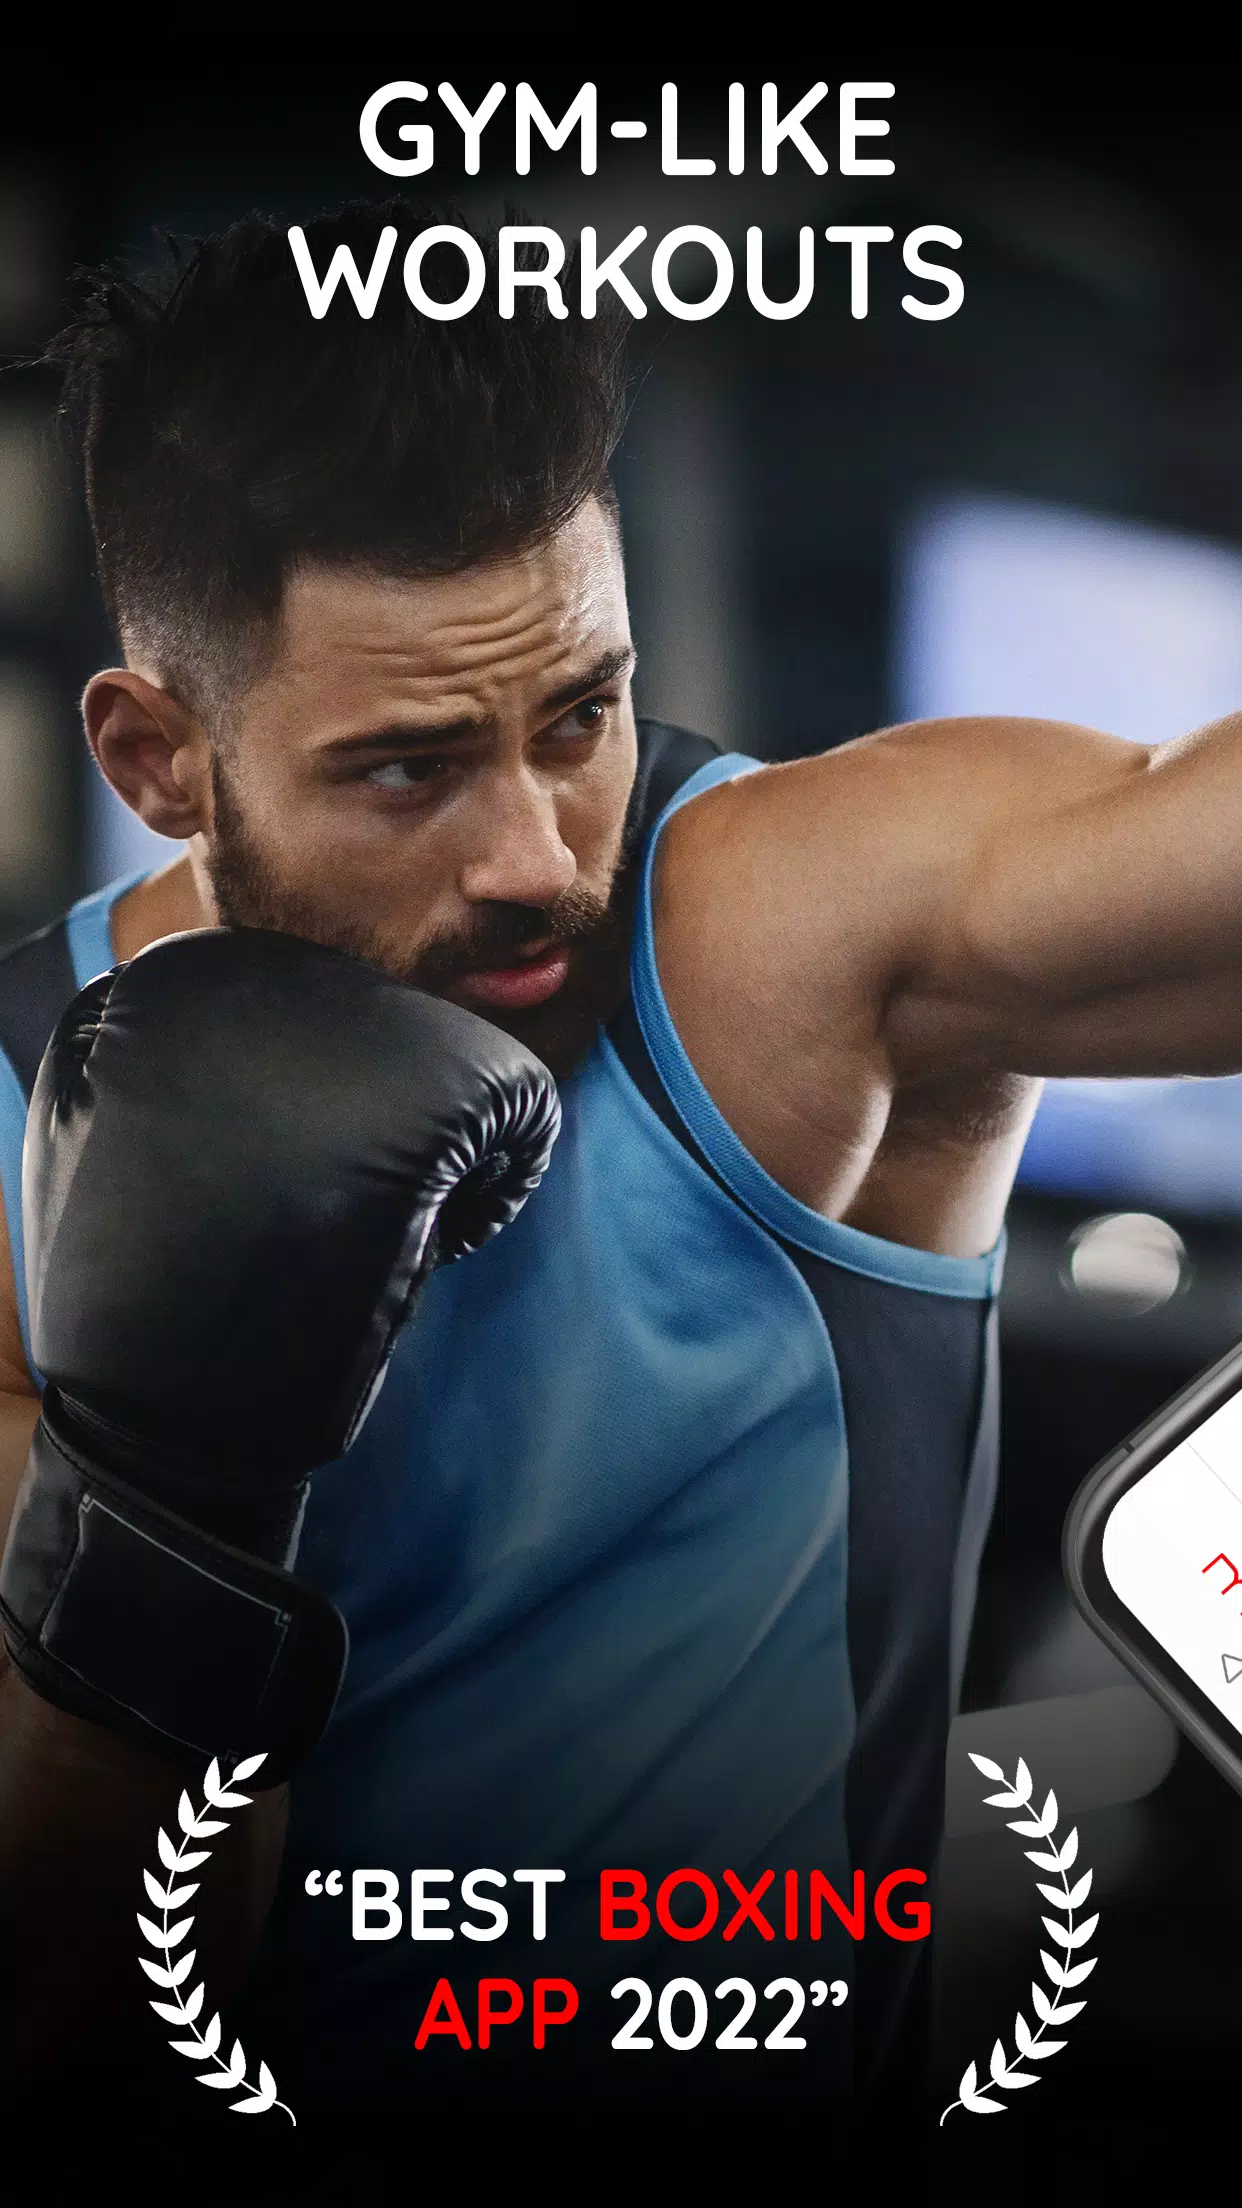 Shadow Boxing App  Training, workouts & punching bag at home